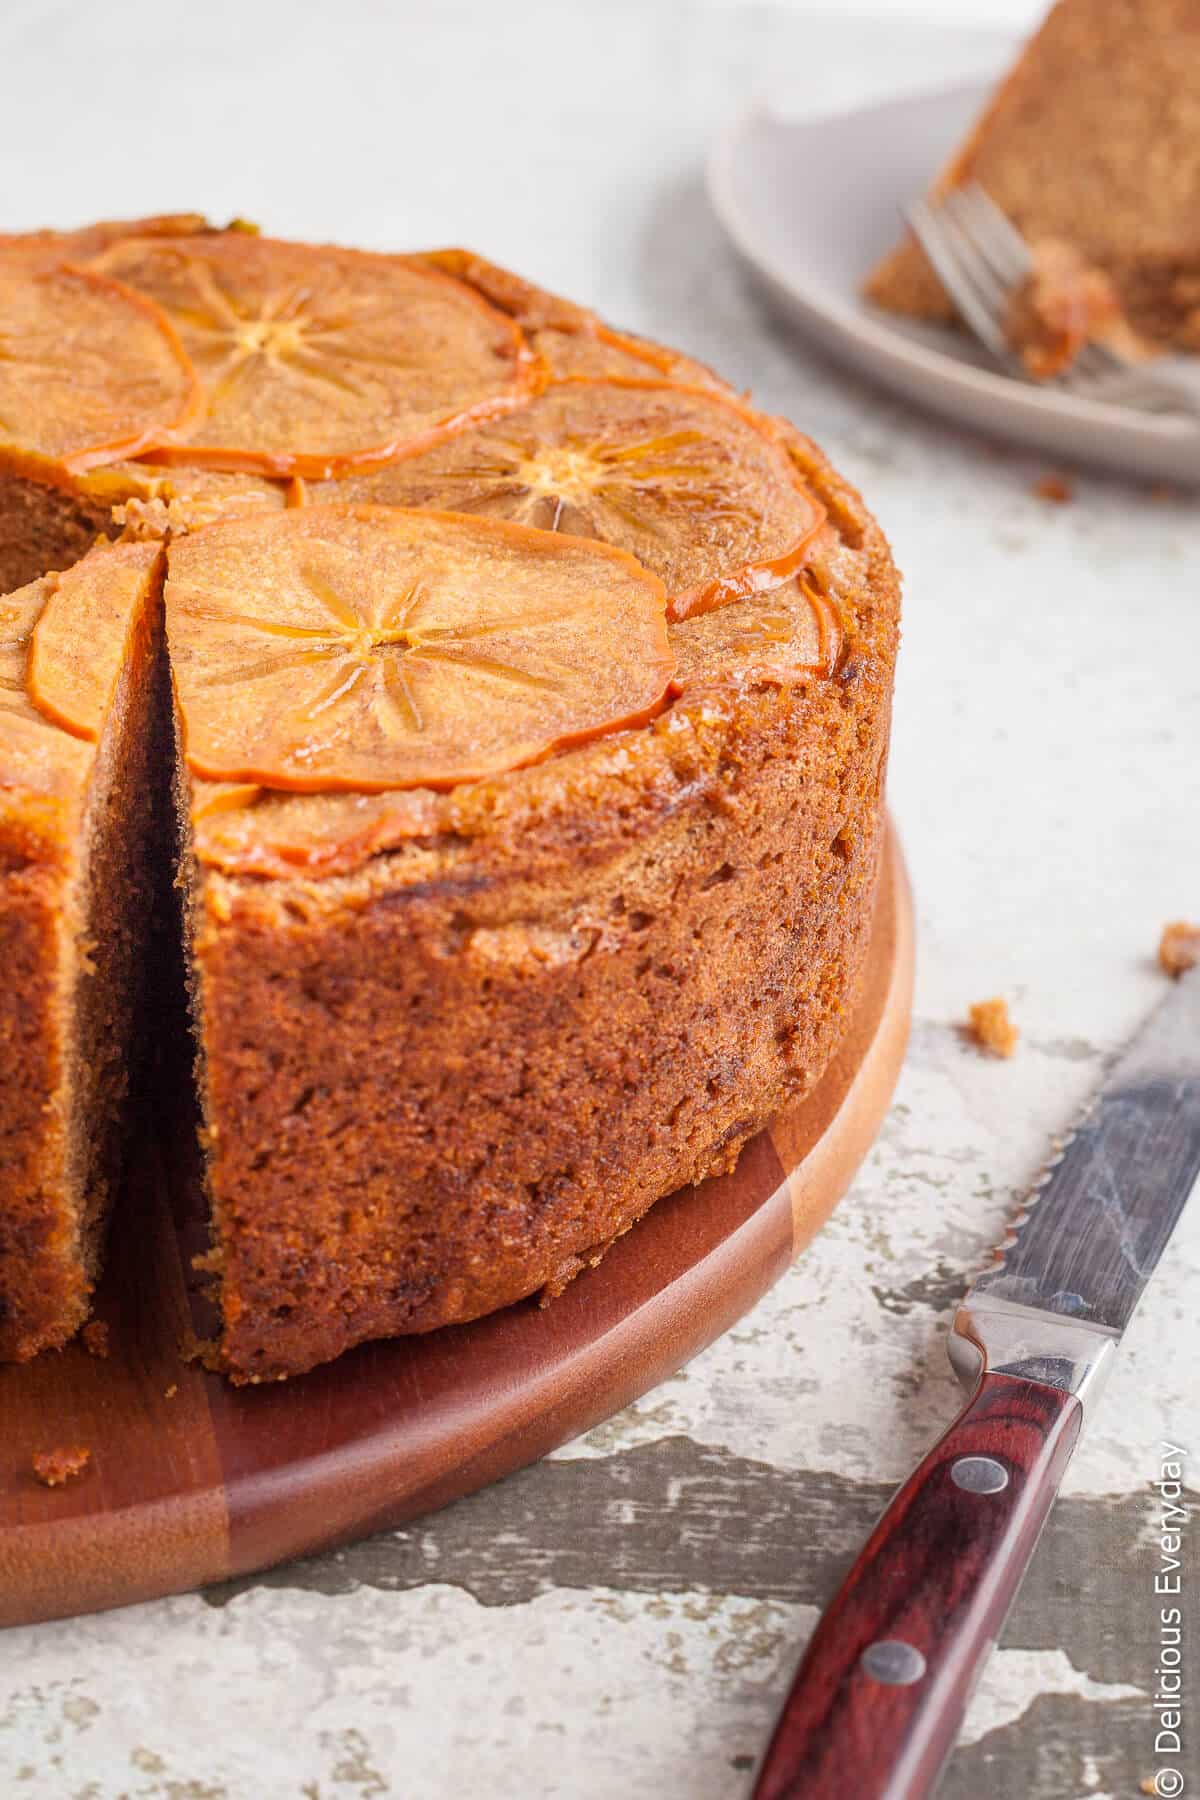 Upside down persimmon cake with maple syrup and walnuts - This gorgeous spiced upside down persimmon cake topped with finely sliced persimmon in maple syrup is a great introduction to persimmons. | Click for the recipe